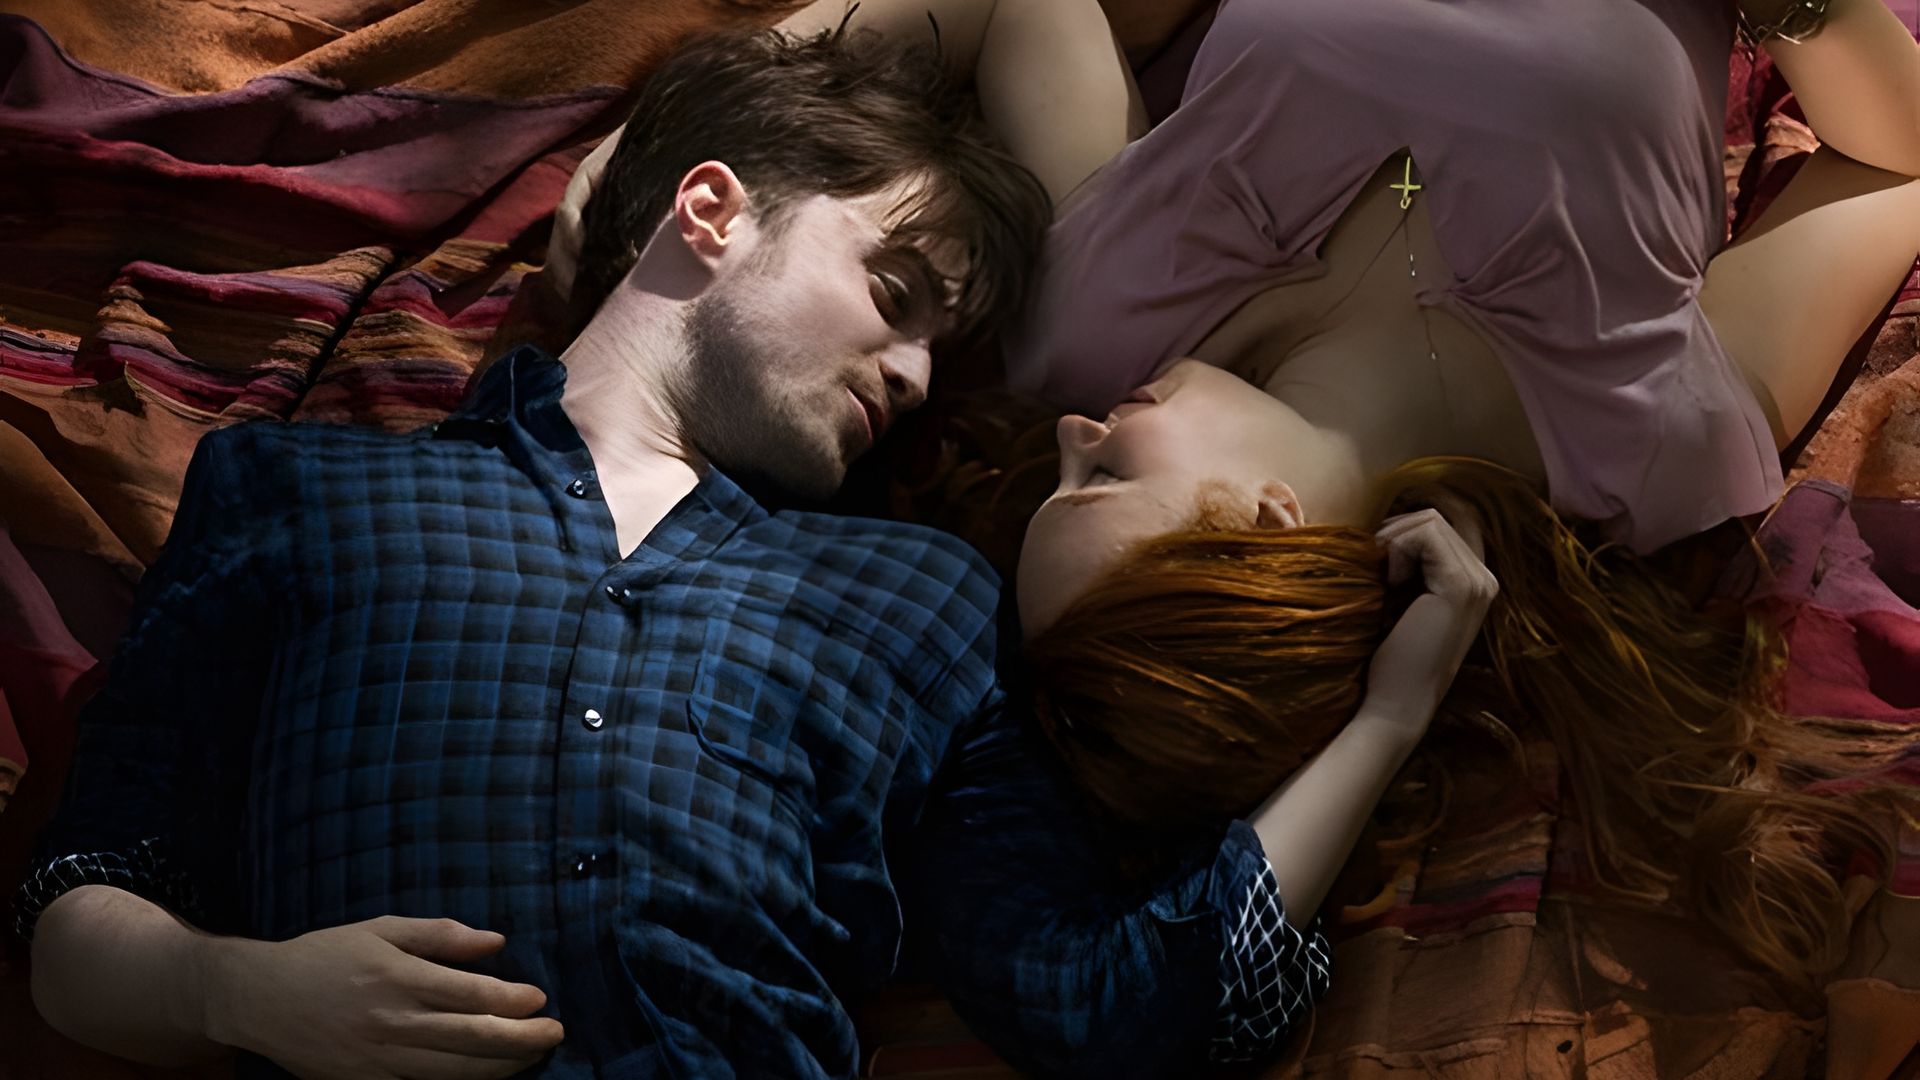 Horns: Juno Temple and Danielle Radcliffe